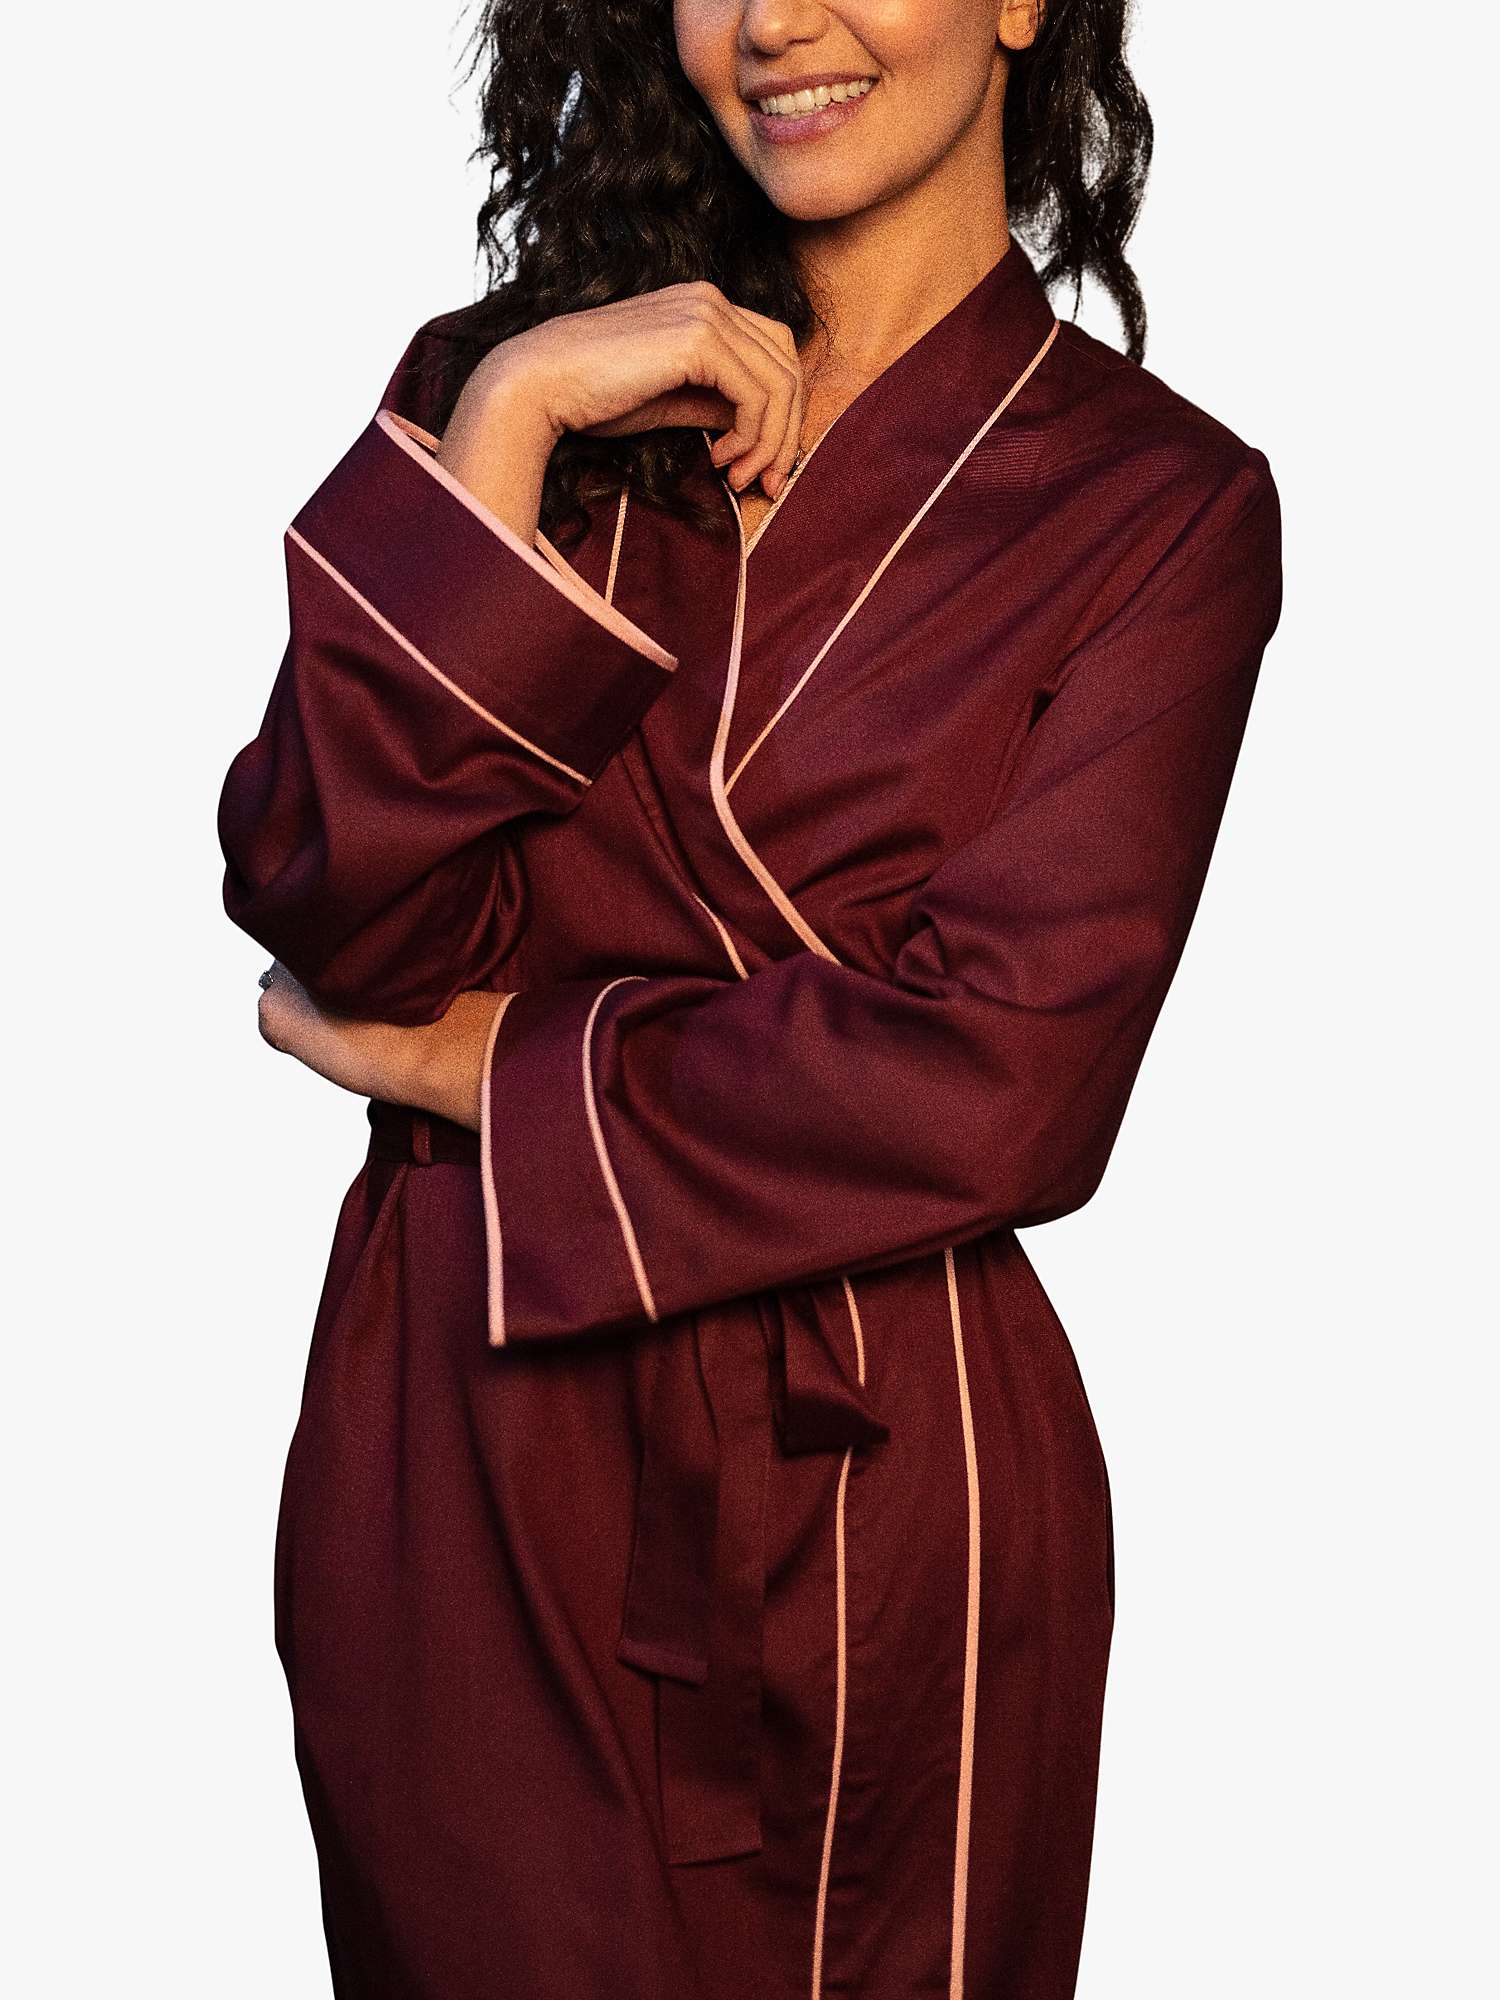 Buy Fable & Eve Piccadilly Long Robe, Burgundy Online at johnlewis.com